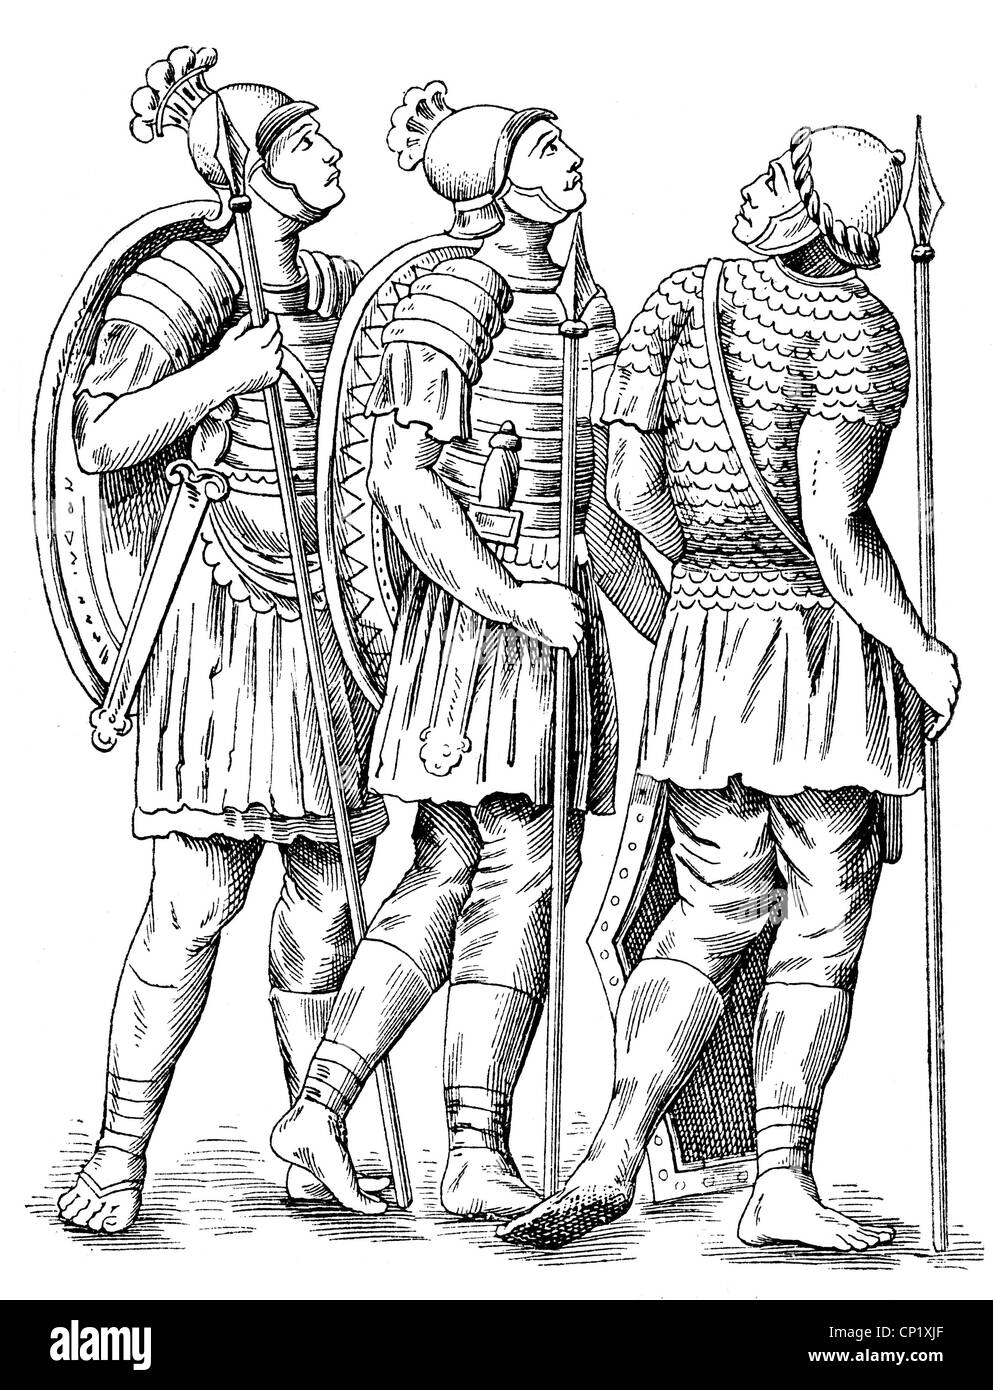 military, Ancient World, Roman Empire, Roman warriors, 2nd century AD, wood engraving, 19th century, after a relief on the Trajan's Column (113 AD), Rome, Romans, Roman, soldier, soldiers, legionnaire, legionaries, spear, spears, lance, lances, helmets, helmet, historic, historical, ancient world, people, Additional-Rights-Clearences-Not Available Stock Photo